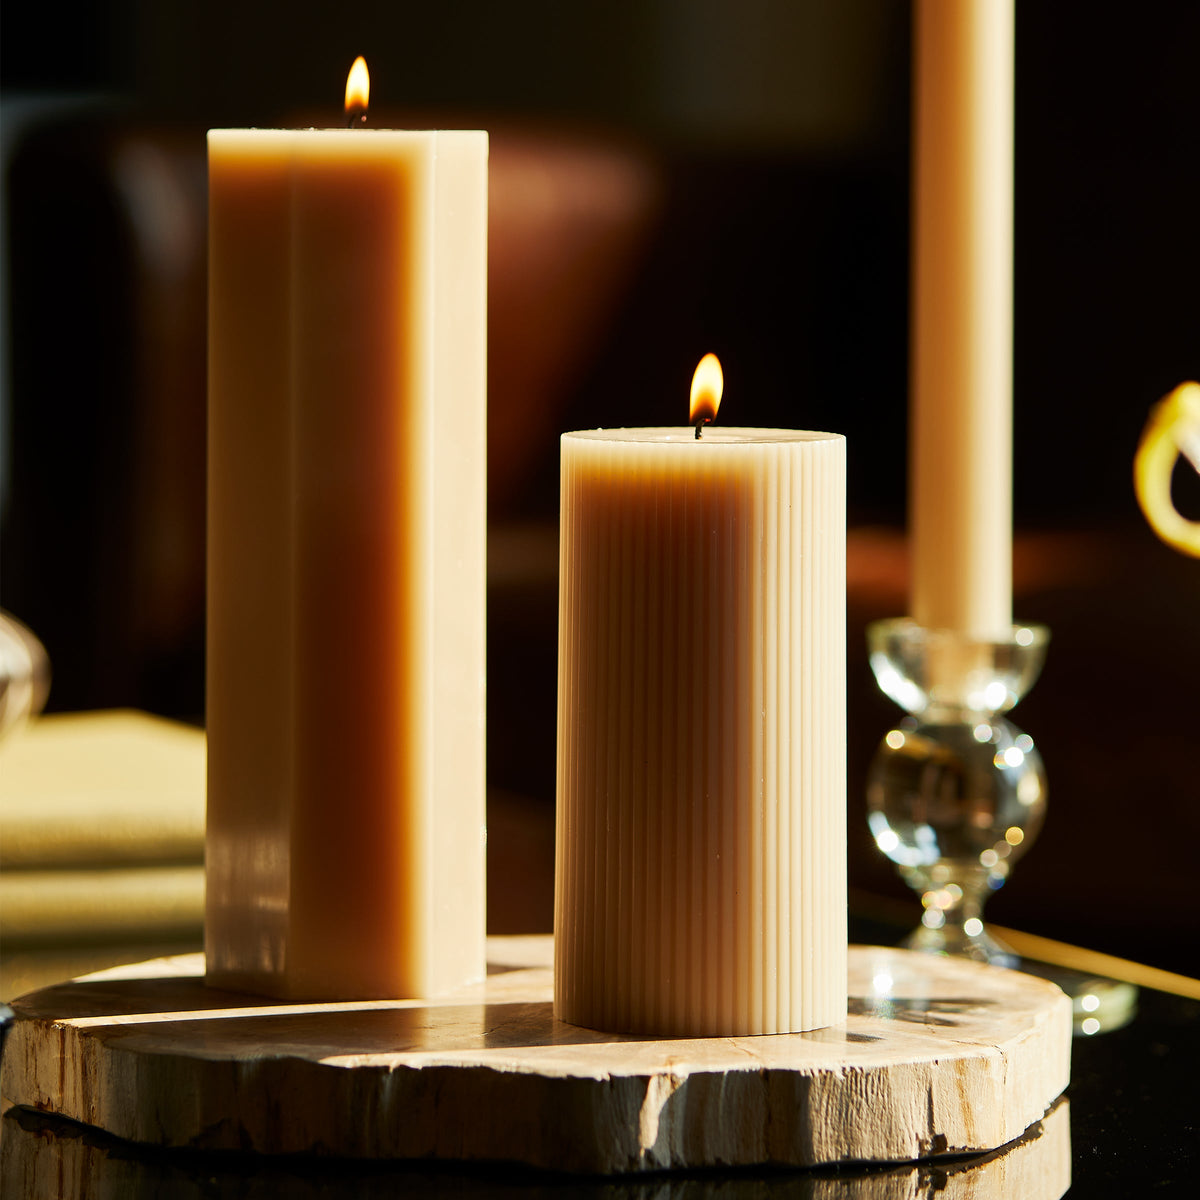 Ribbed Pillar Candle in Parchment White 6 inch from Caskata, surrounded by a larger pillar and candlestick in same color.